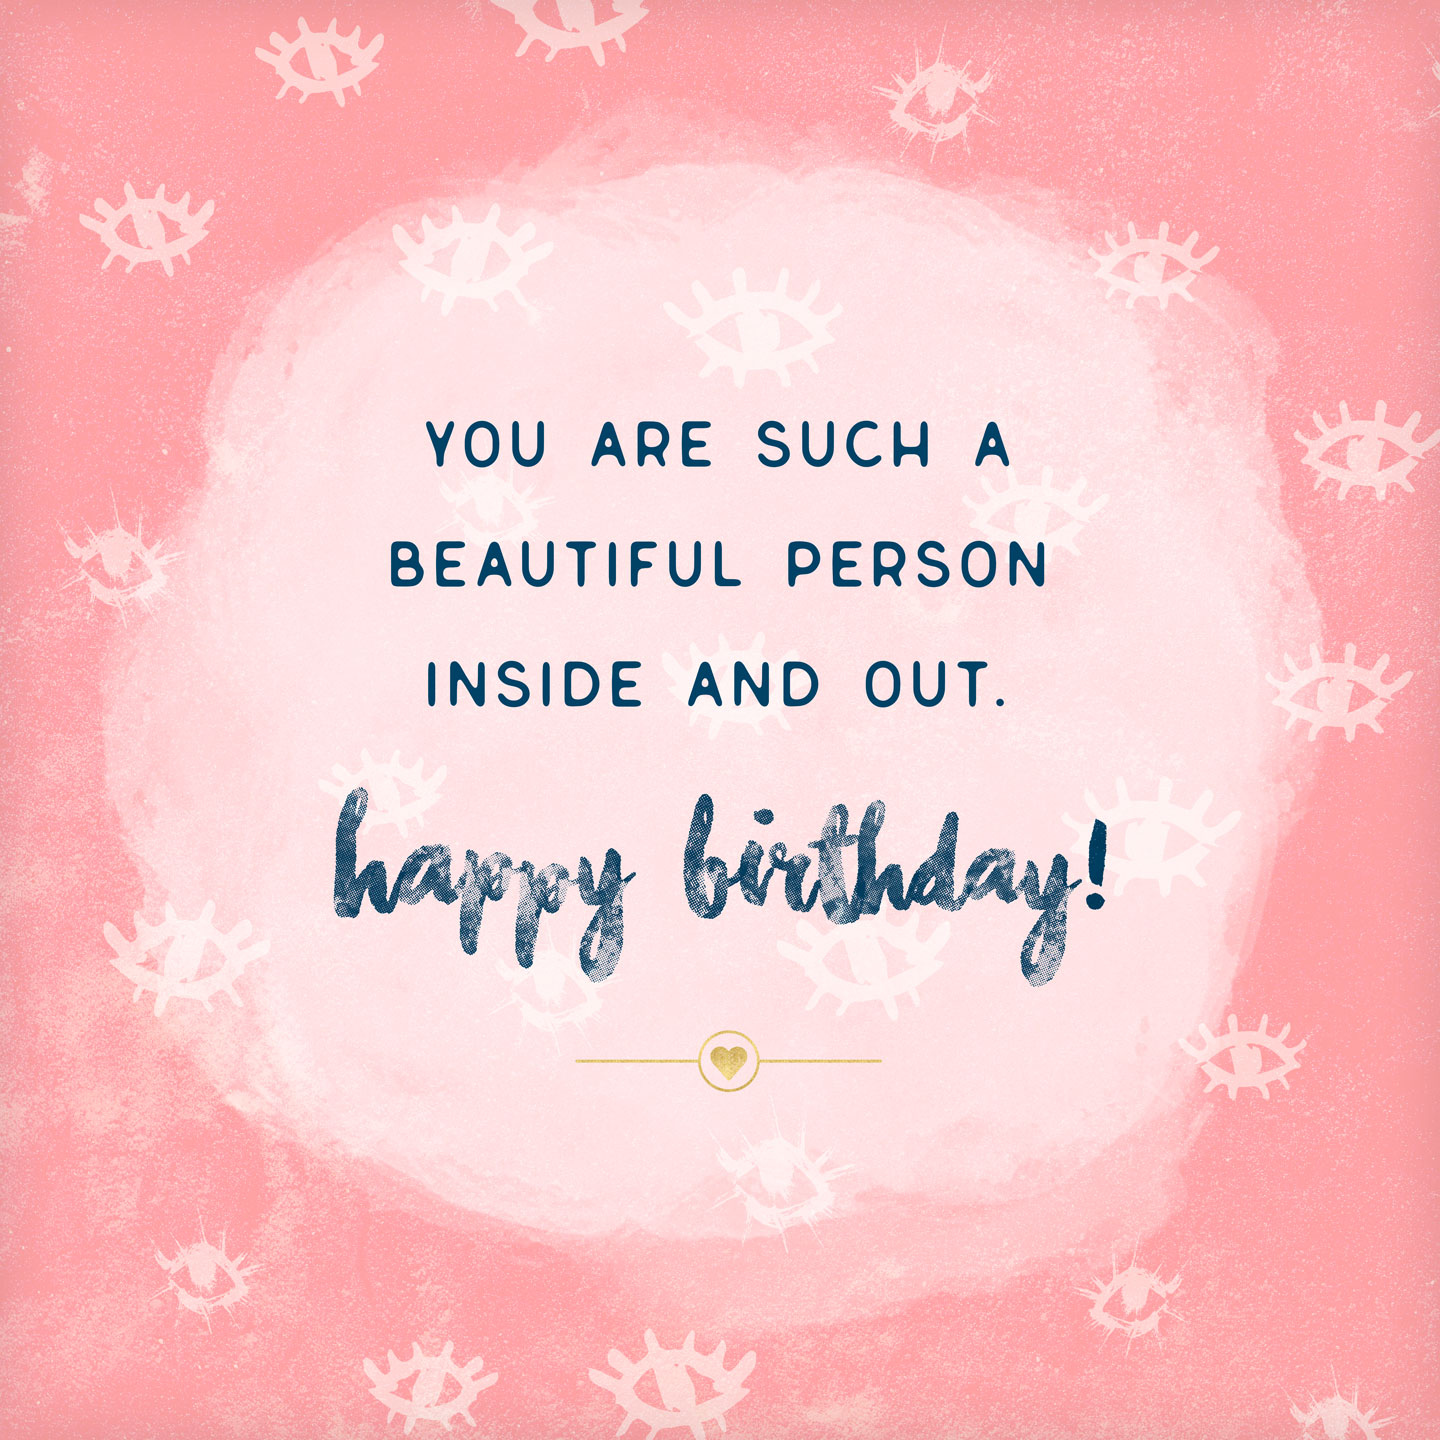 what-to-write-in-a-birthday-card-48-birthday-messages-and-wishes-ftd-free-printable-birthday-cards